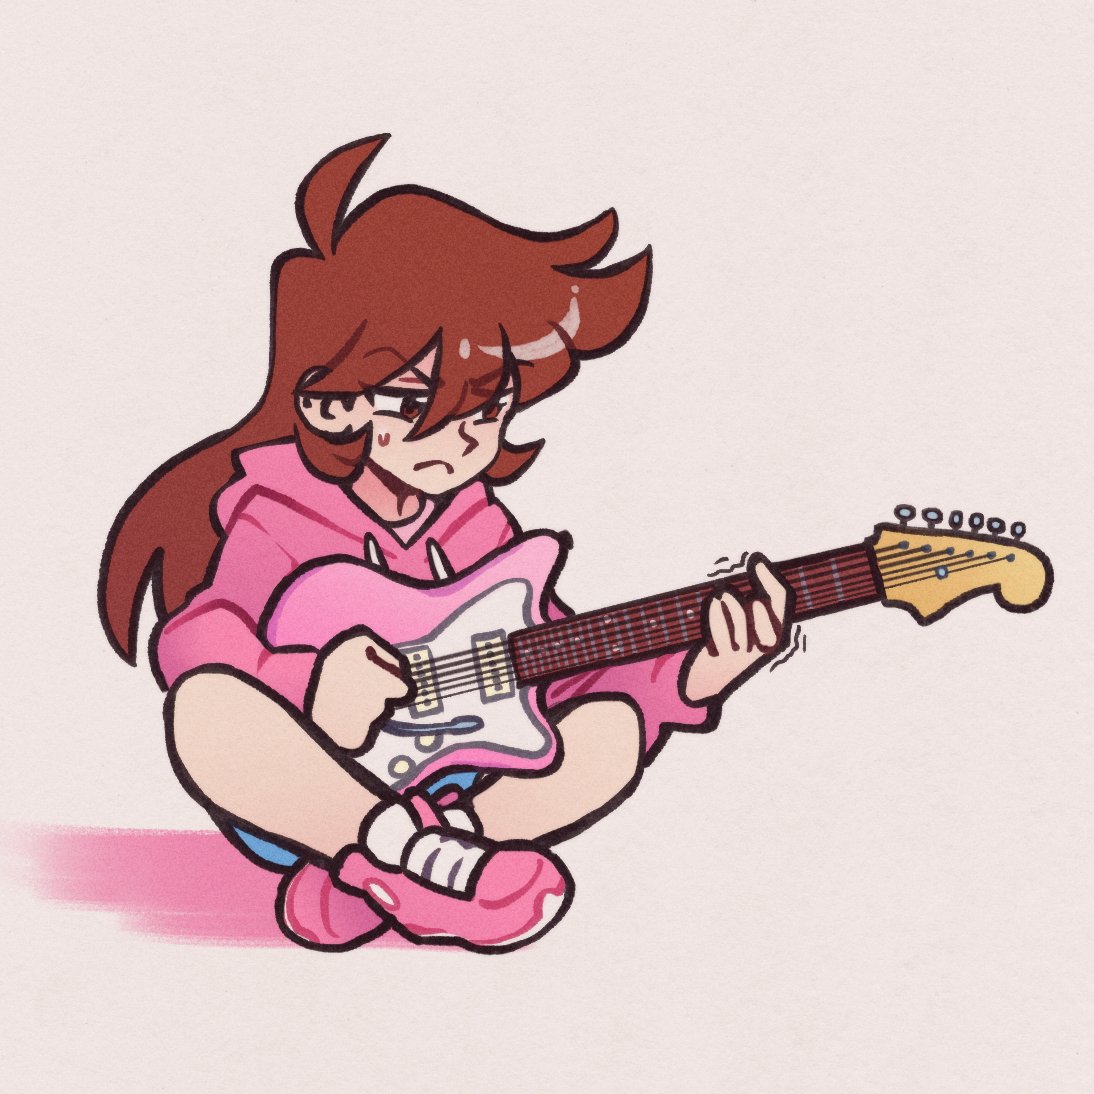 「she can't play barre chords... 」|Tokaii - OPEN COMMISSIONSのイラスト